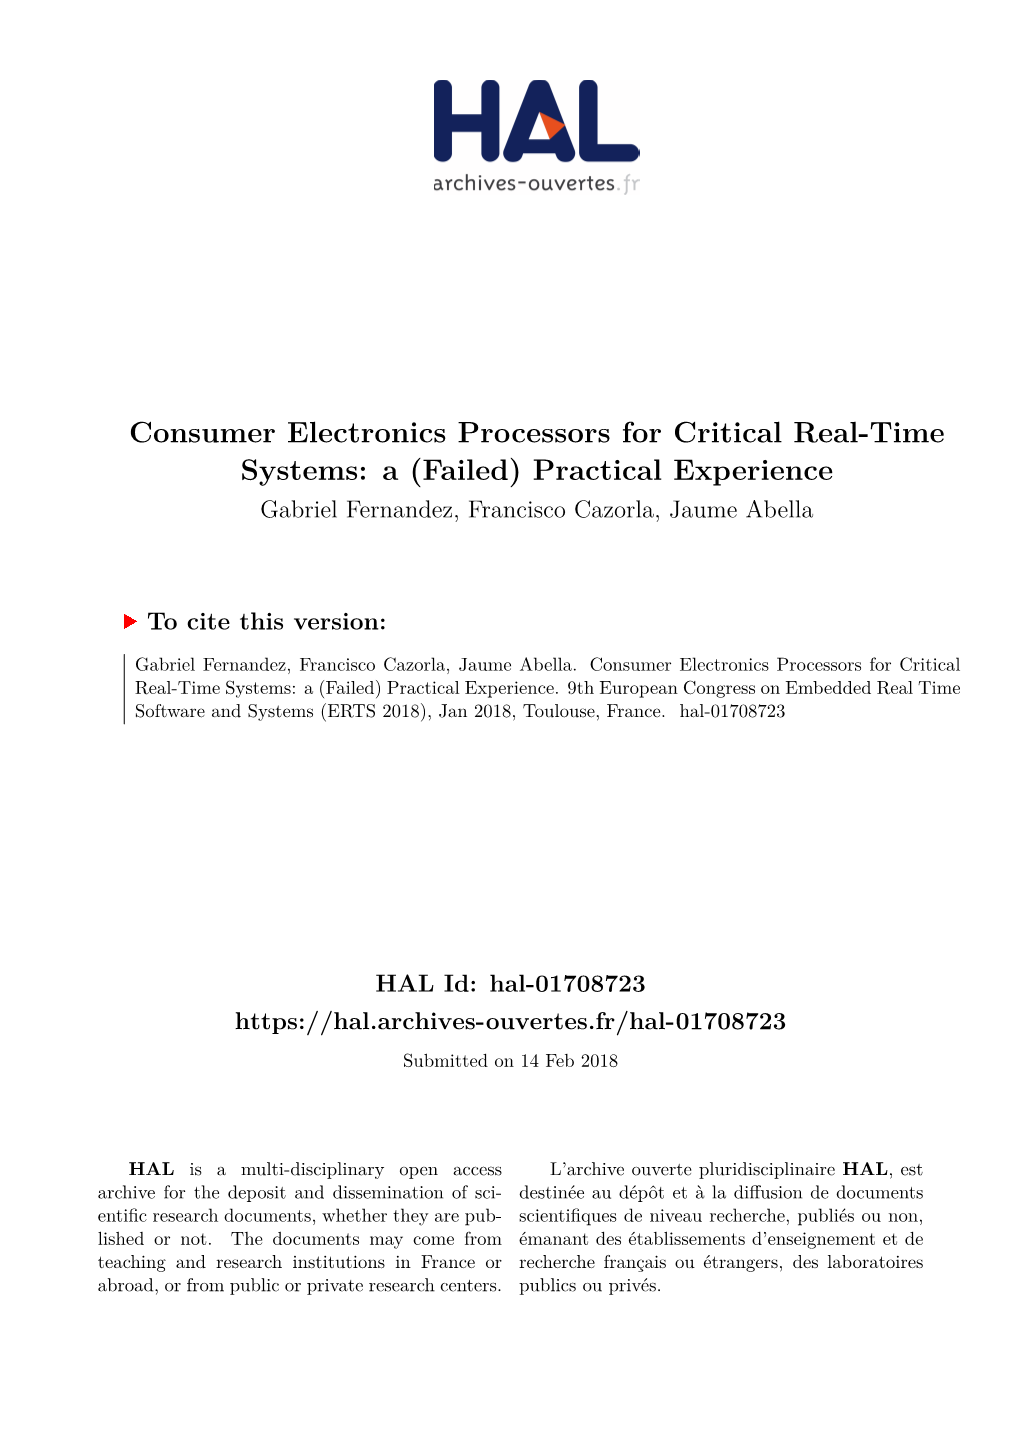 Consumer Electronics Processors for Critical Real-Time Systems: a (Failed) Practical Experience Gabriel Fernandez, Francisco Cazorla, Jaume Abella